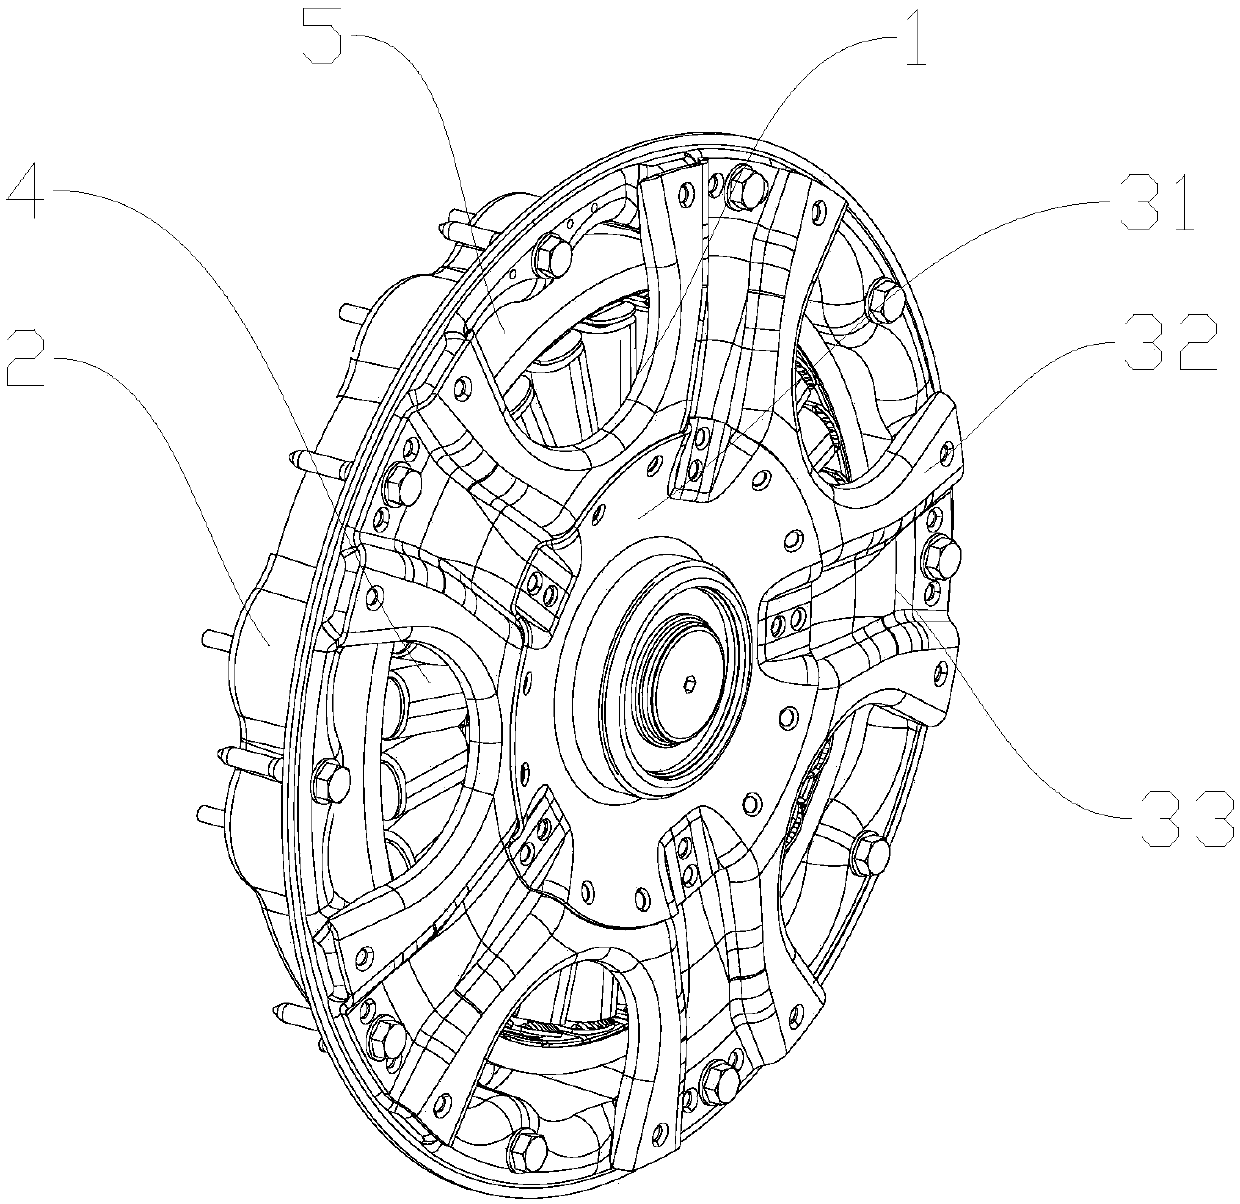 Direct drive motor for clothing treatment device and clothing treatment device